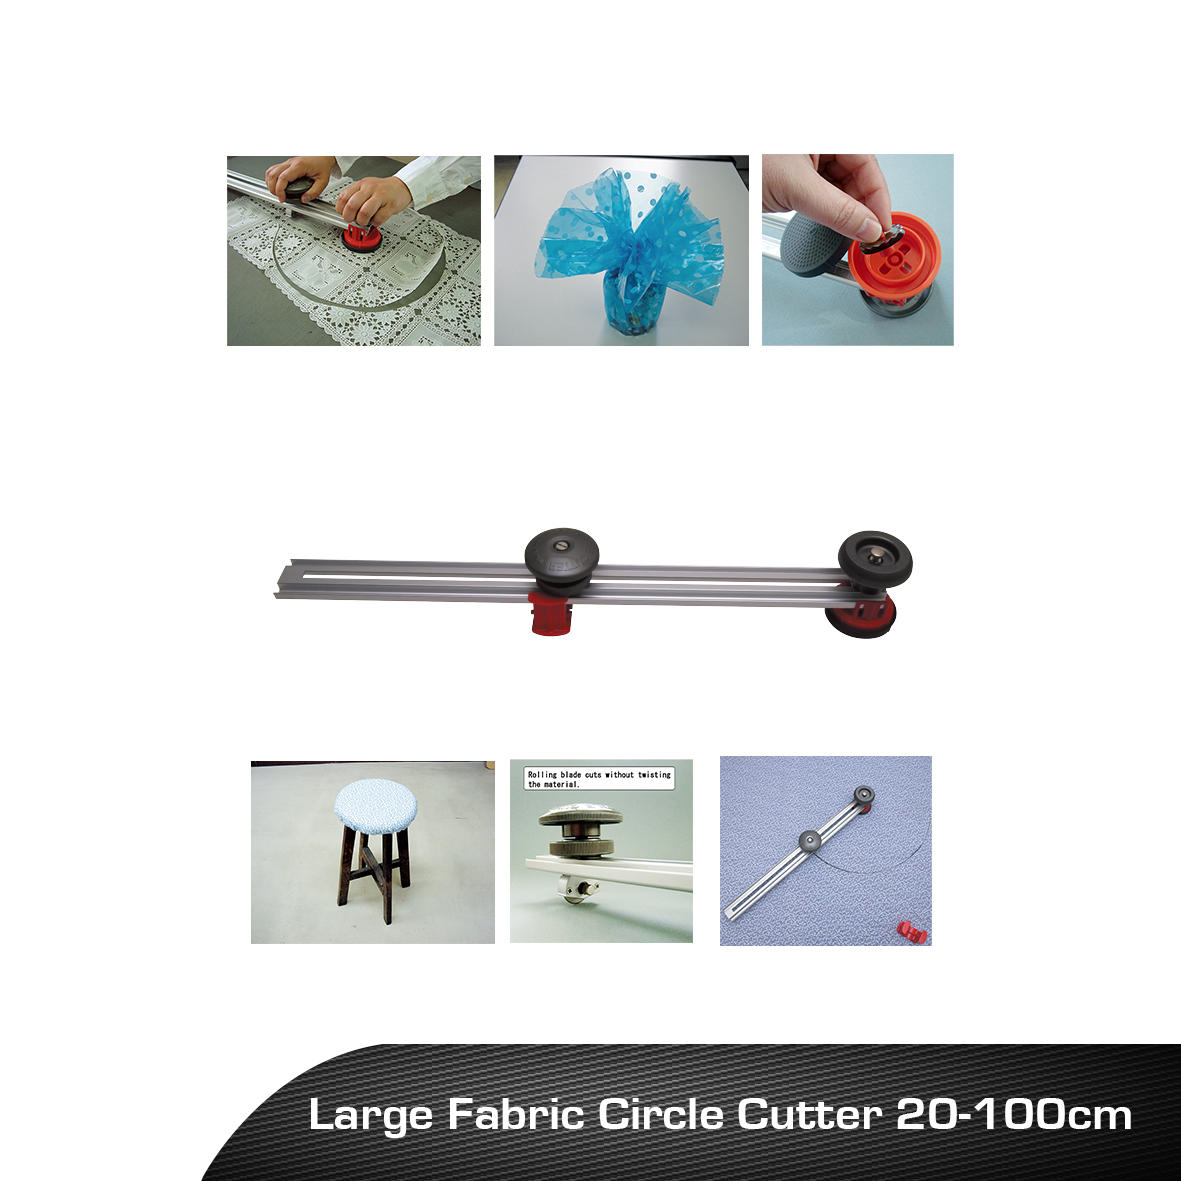 Large Fabric Circle Cutter 20-100cm - RT Media Solutions